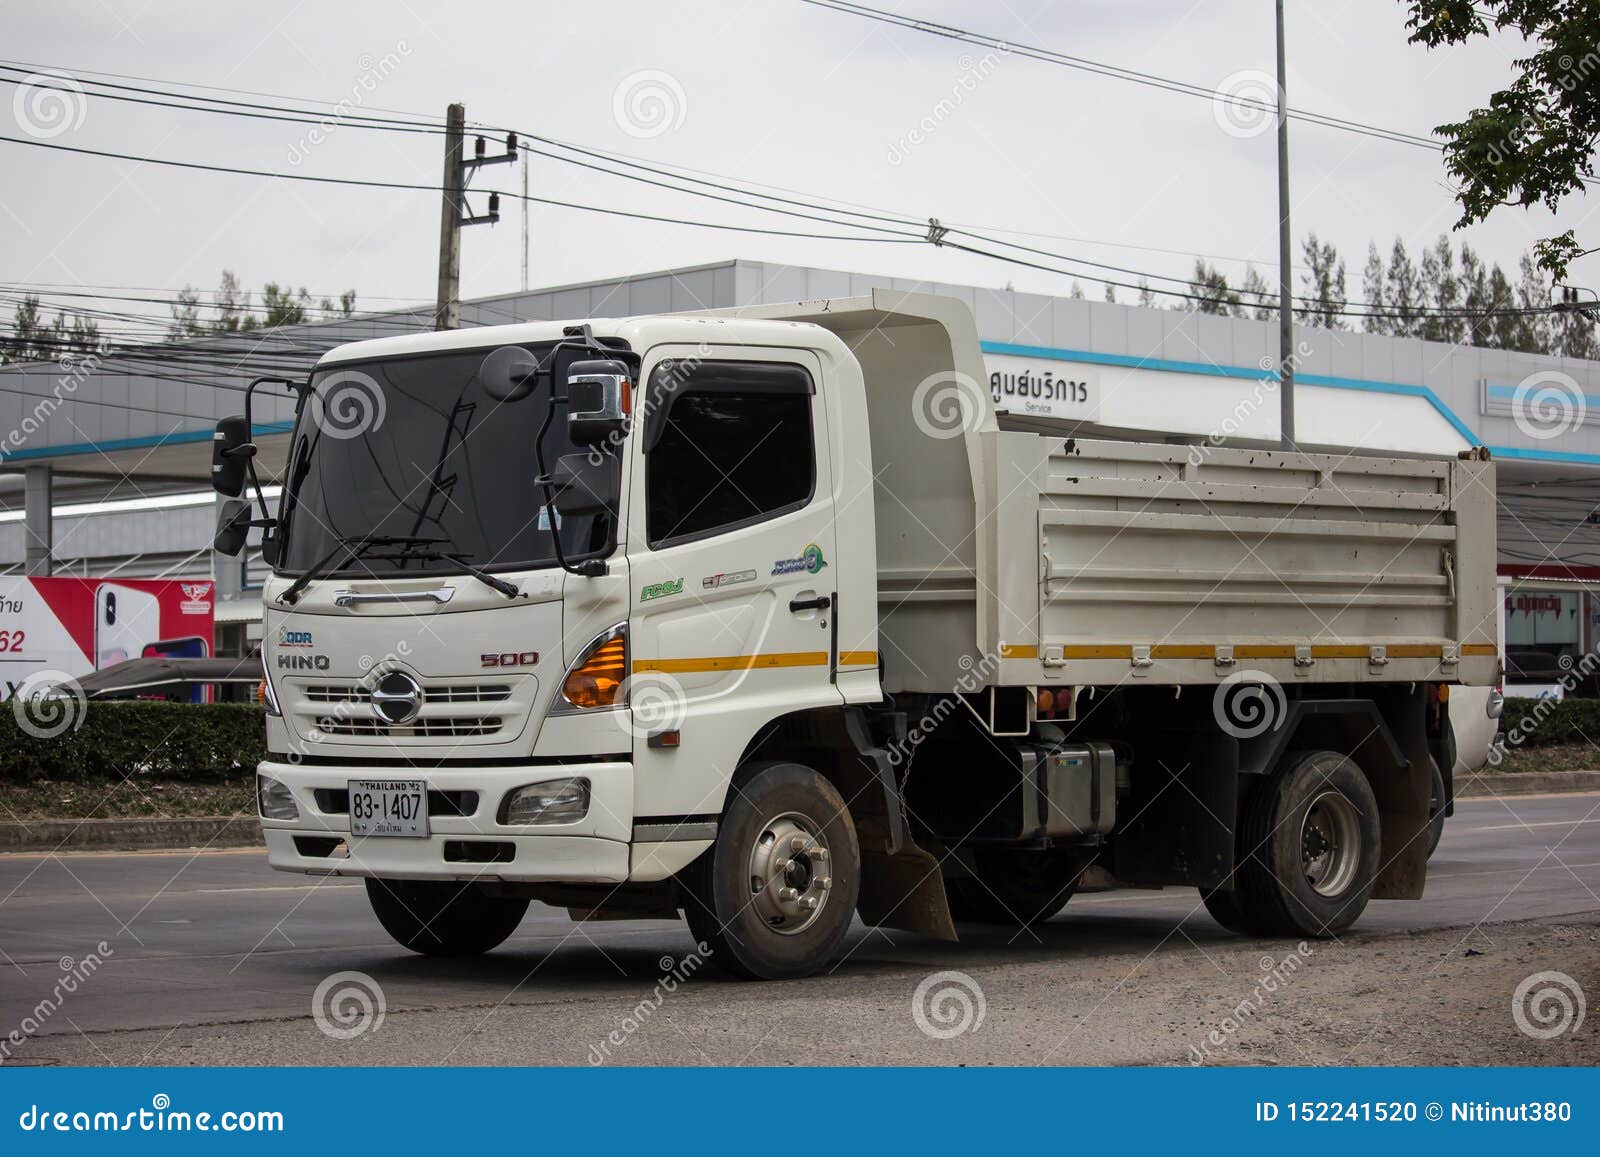 Private Hino Dump Truck  editorial image Image of sand 